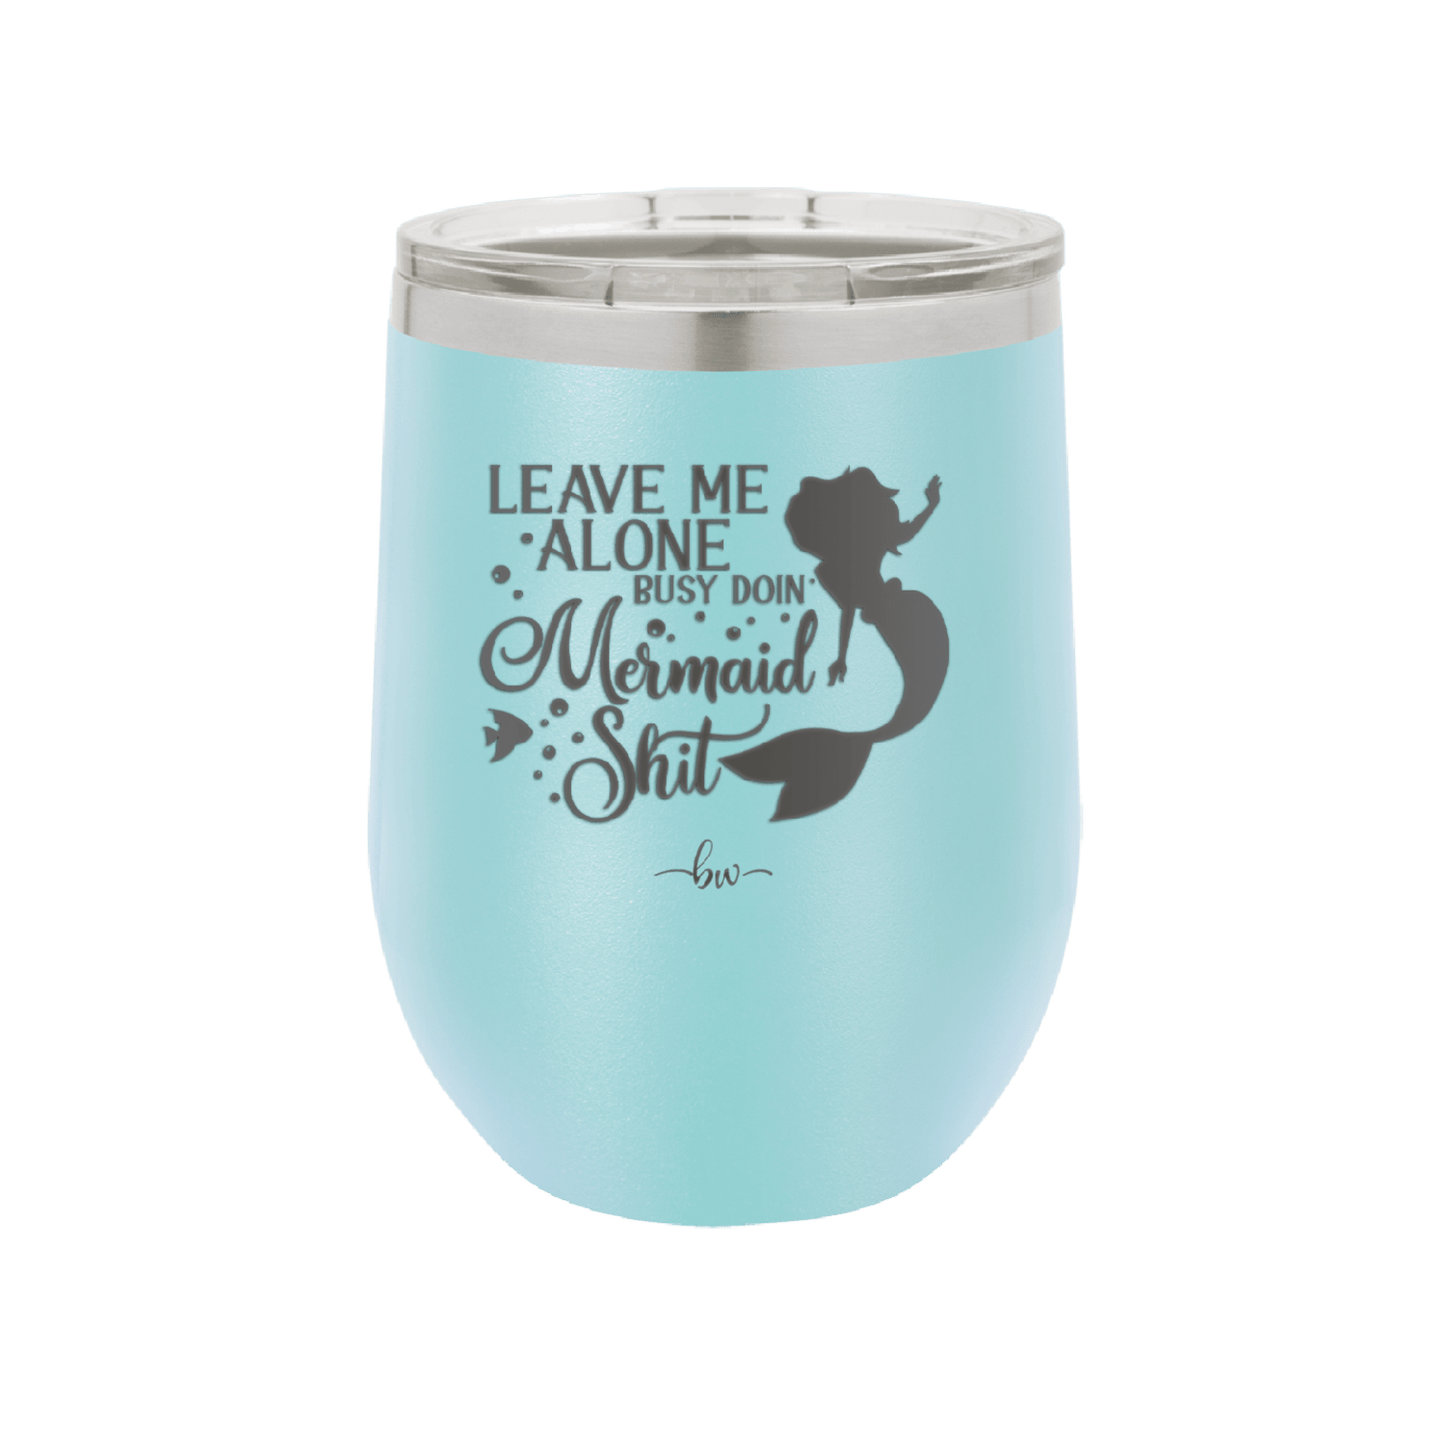 Leave Me Alone Busy Doin Mermaid Shit 3 - Laser Engraved Stainless Steel Drinkware - 1477 -